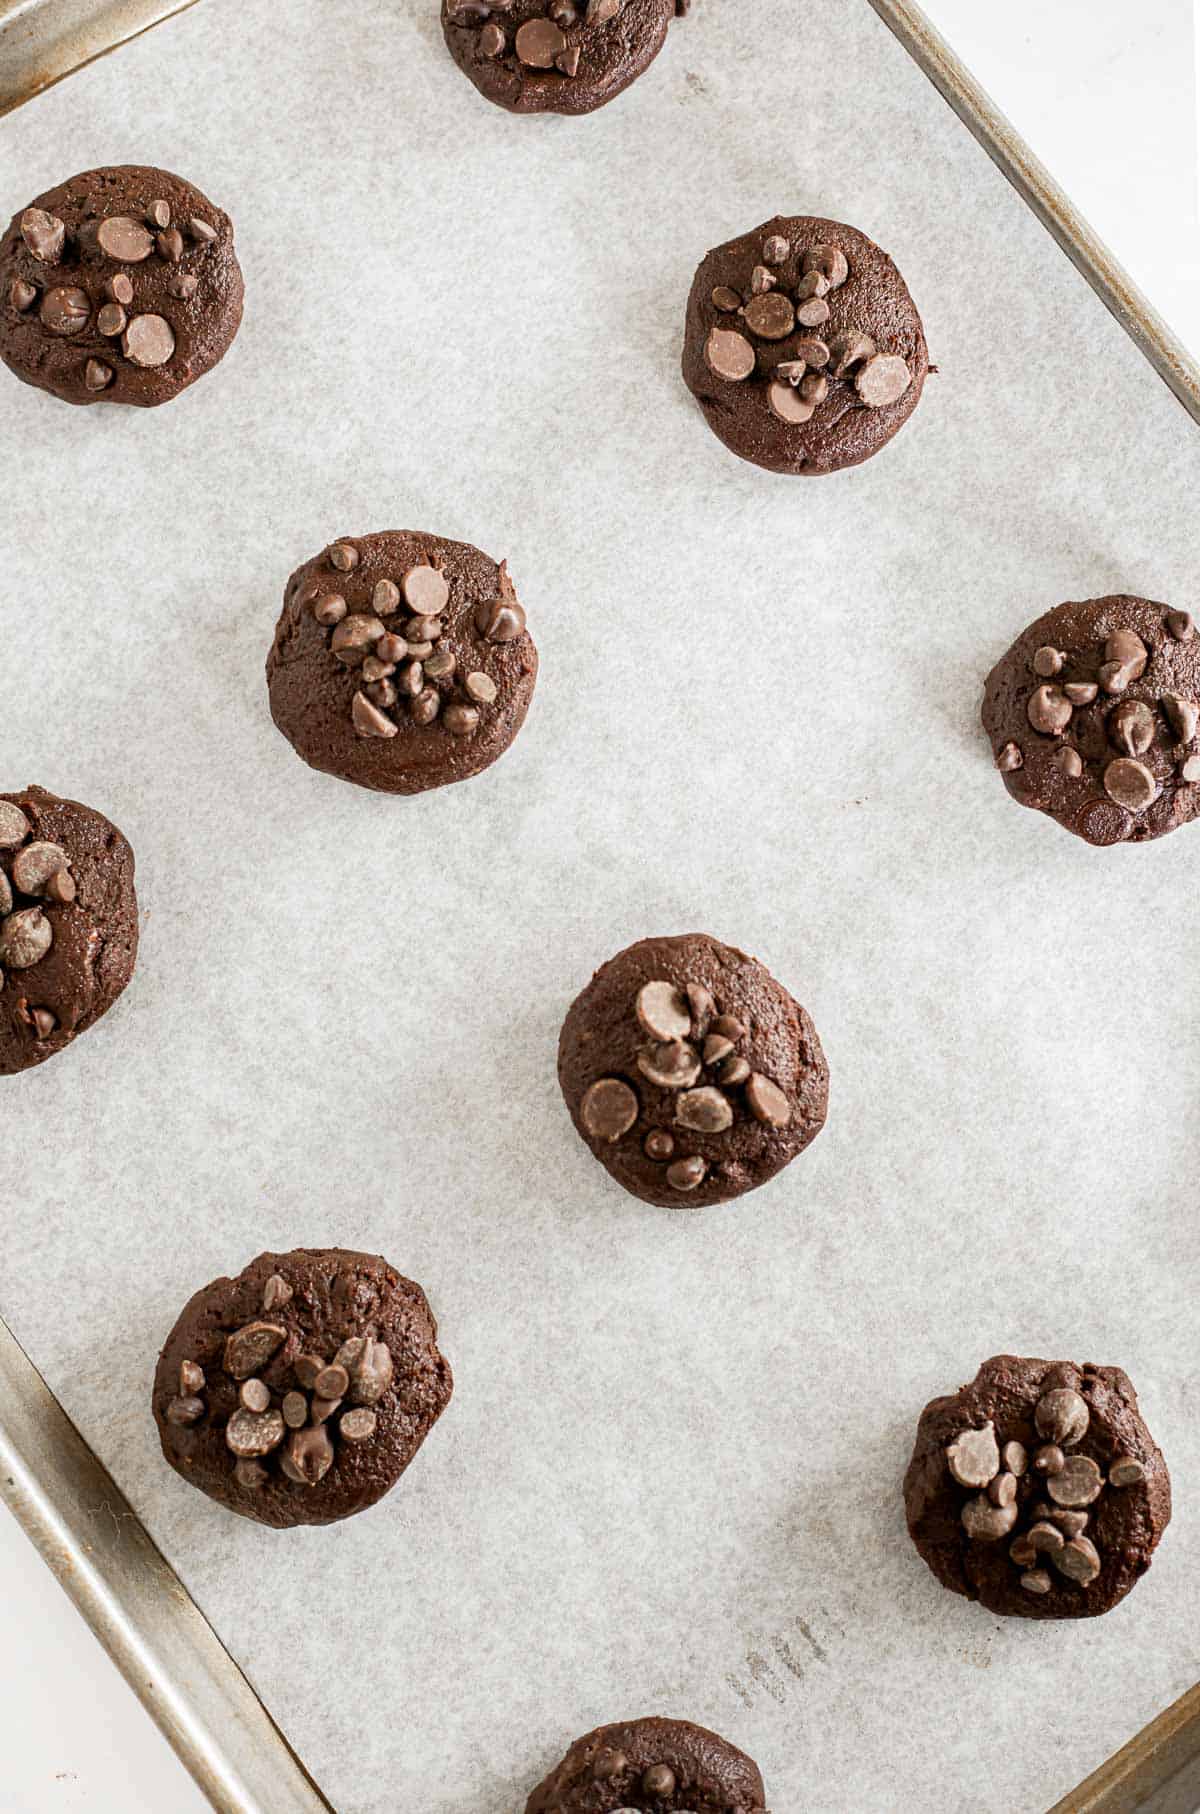 Rolled balls of egg free chocolate cookie dough on a parchment lined baking sheet.